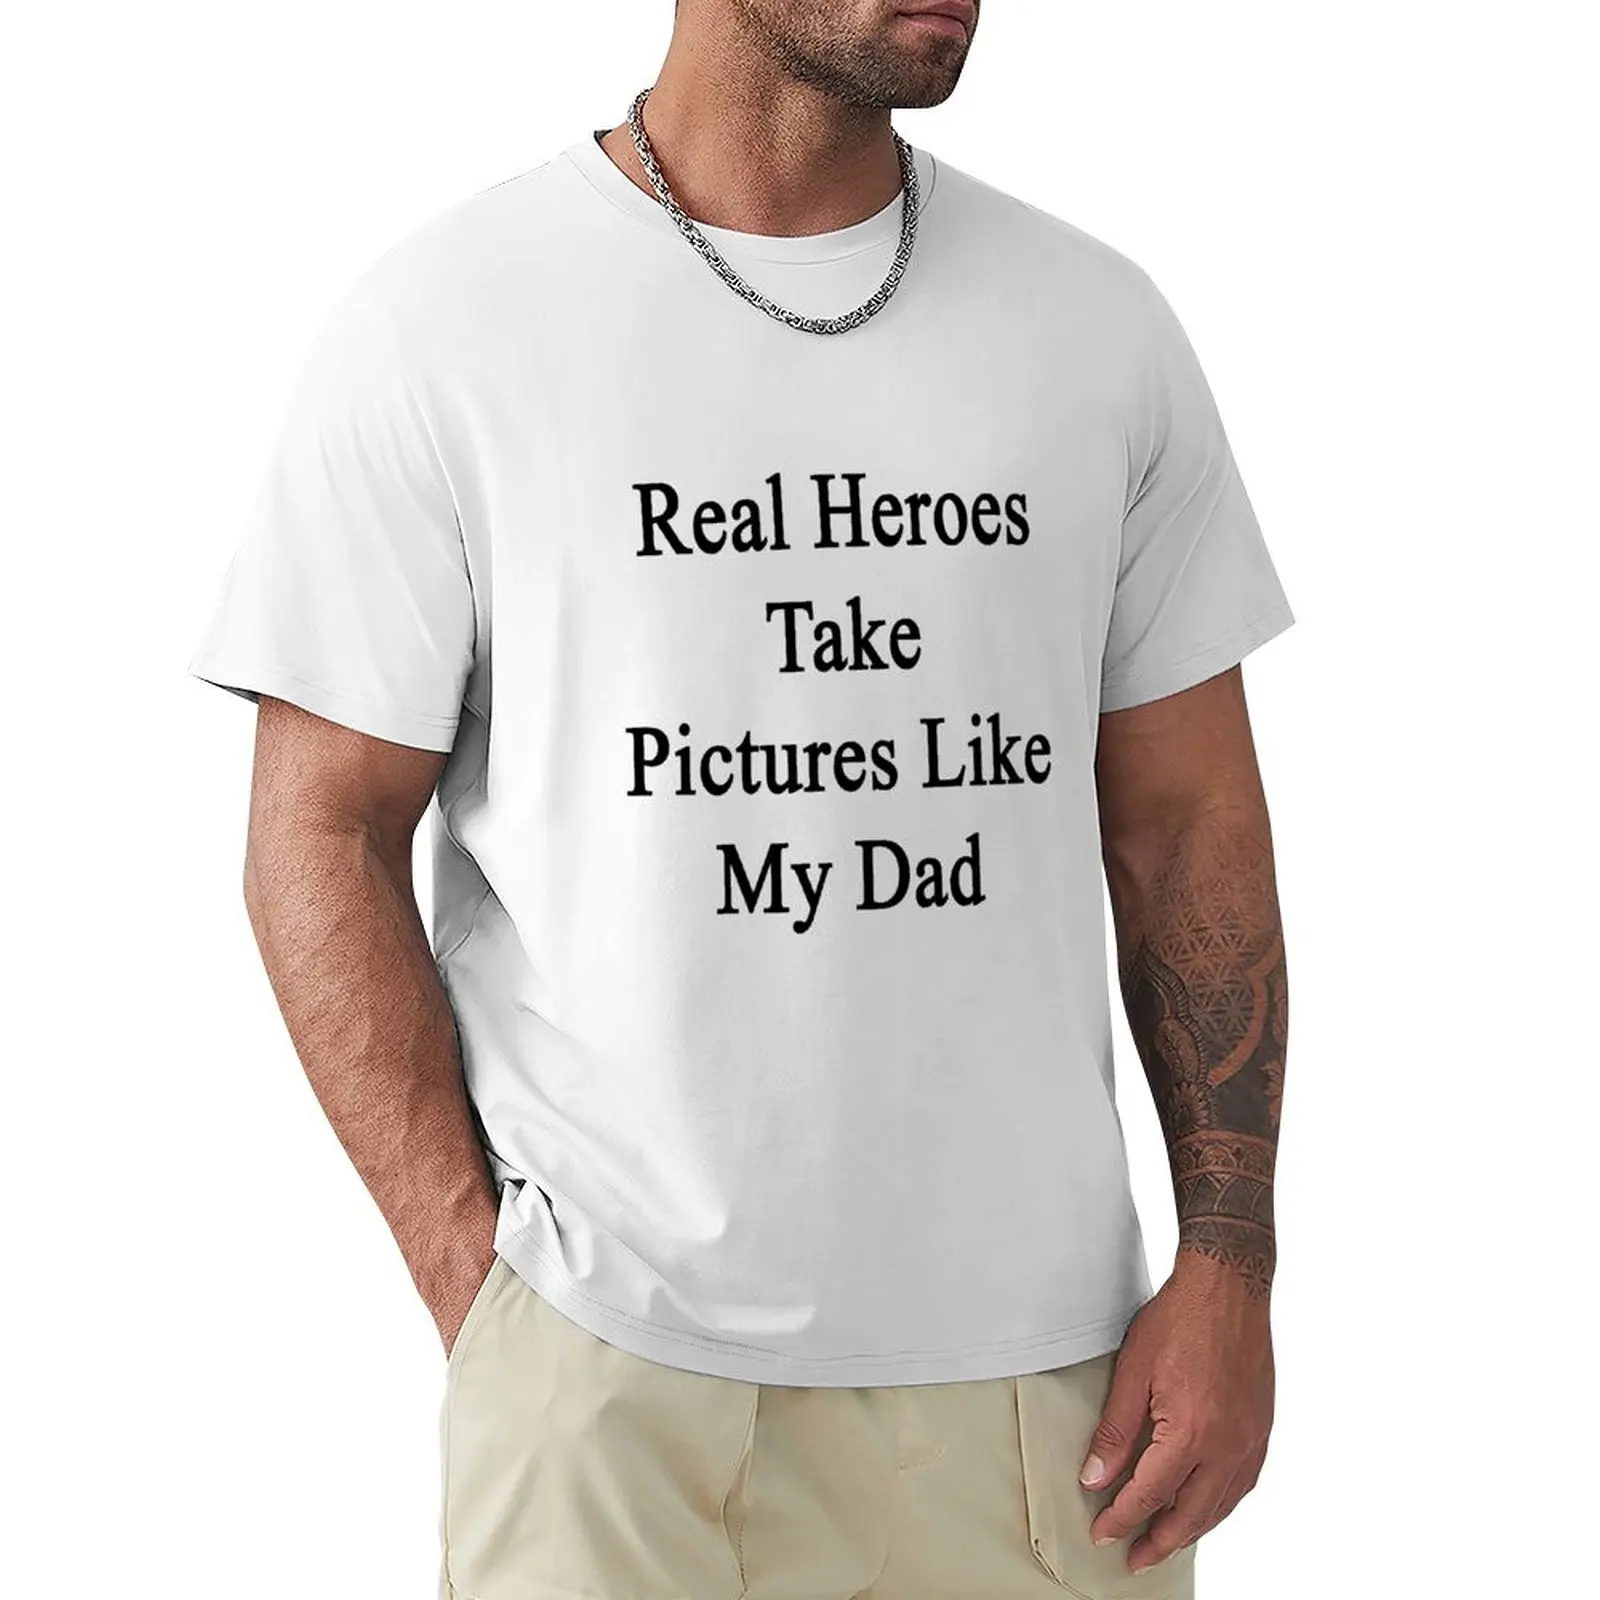 

Real Heroes Take Pictures Like My Dad T-Shirt sublime cute clothes anime clothes t shirts for men pack